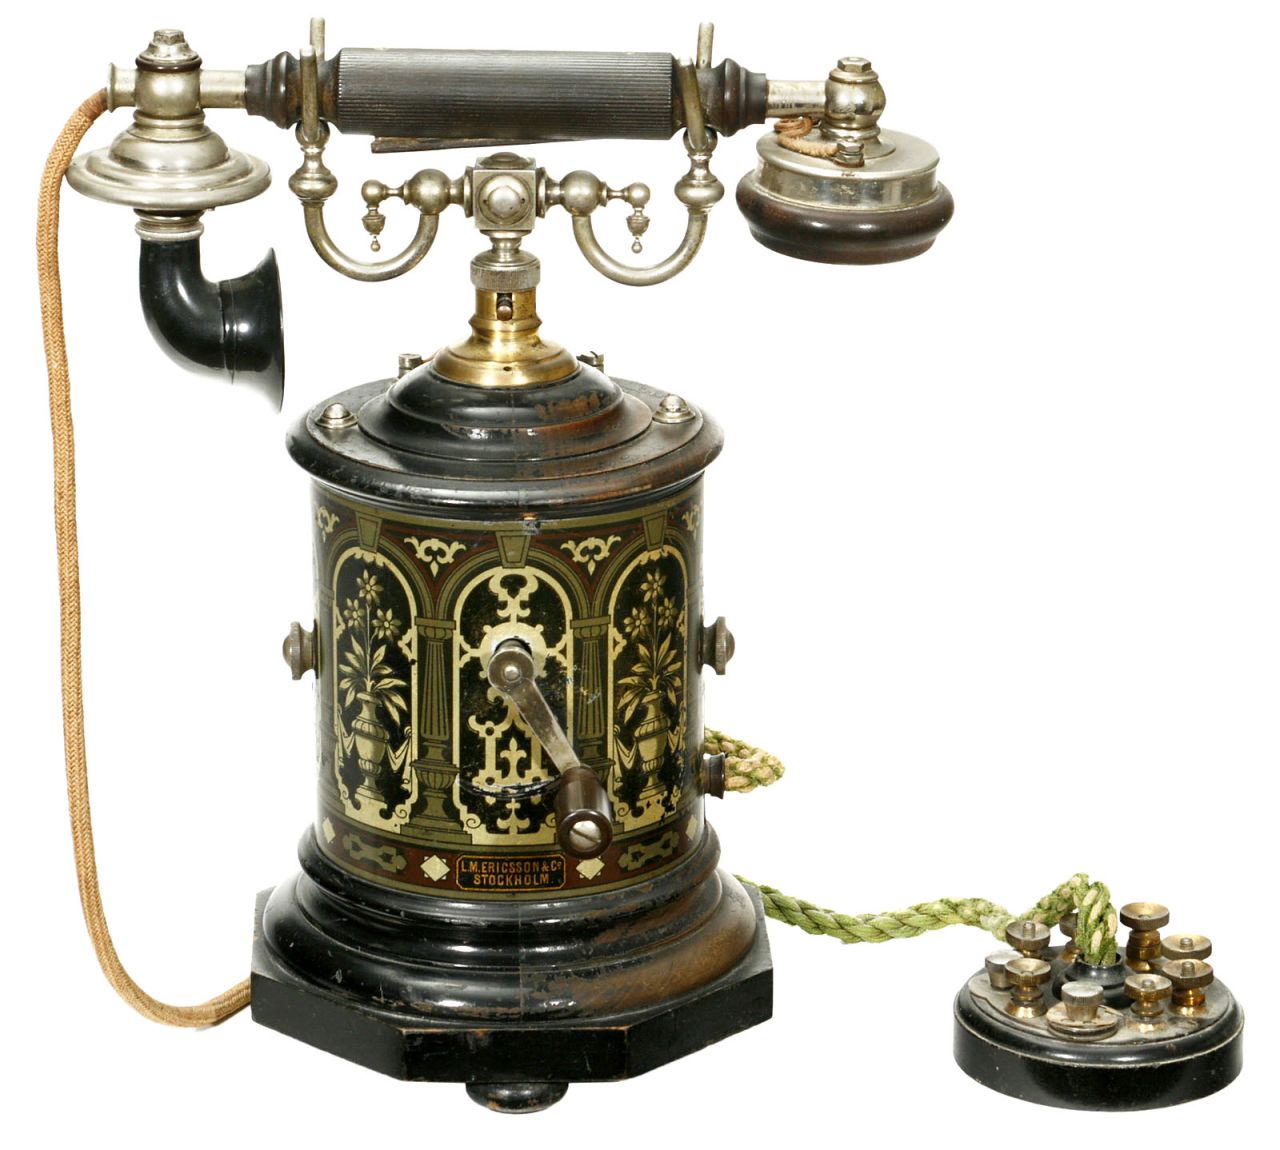 A 1905 L.M. Ericsson & Co. desk telephone known as the 'coffee grinder' for its circular shape and distinctive lithographed decoration.